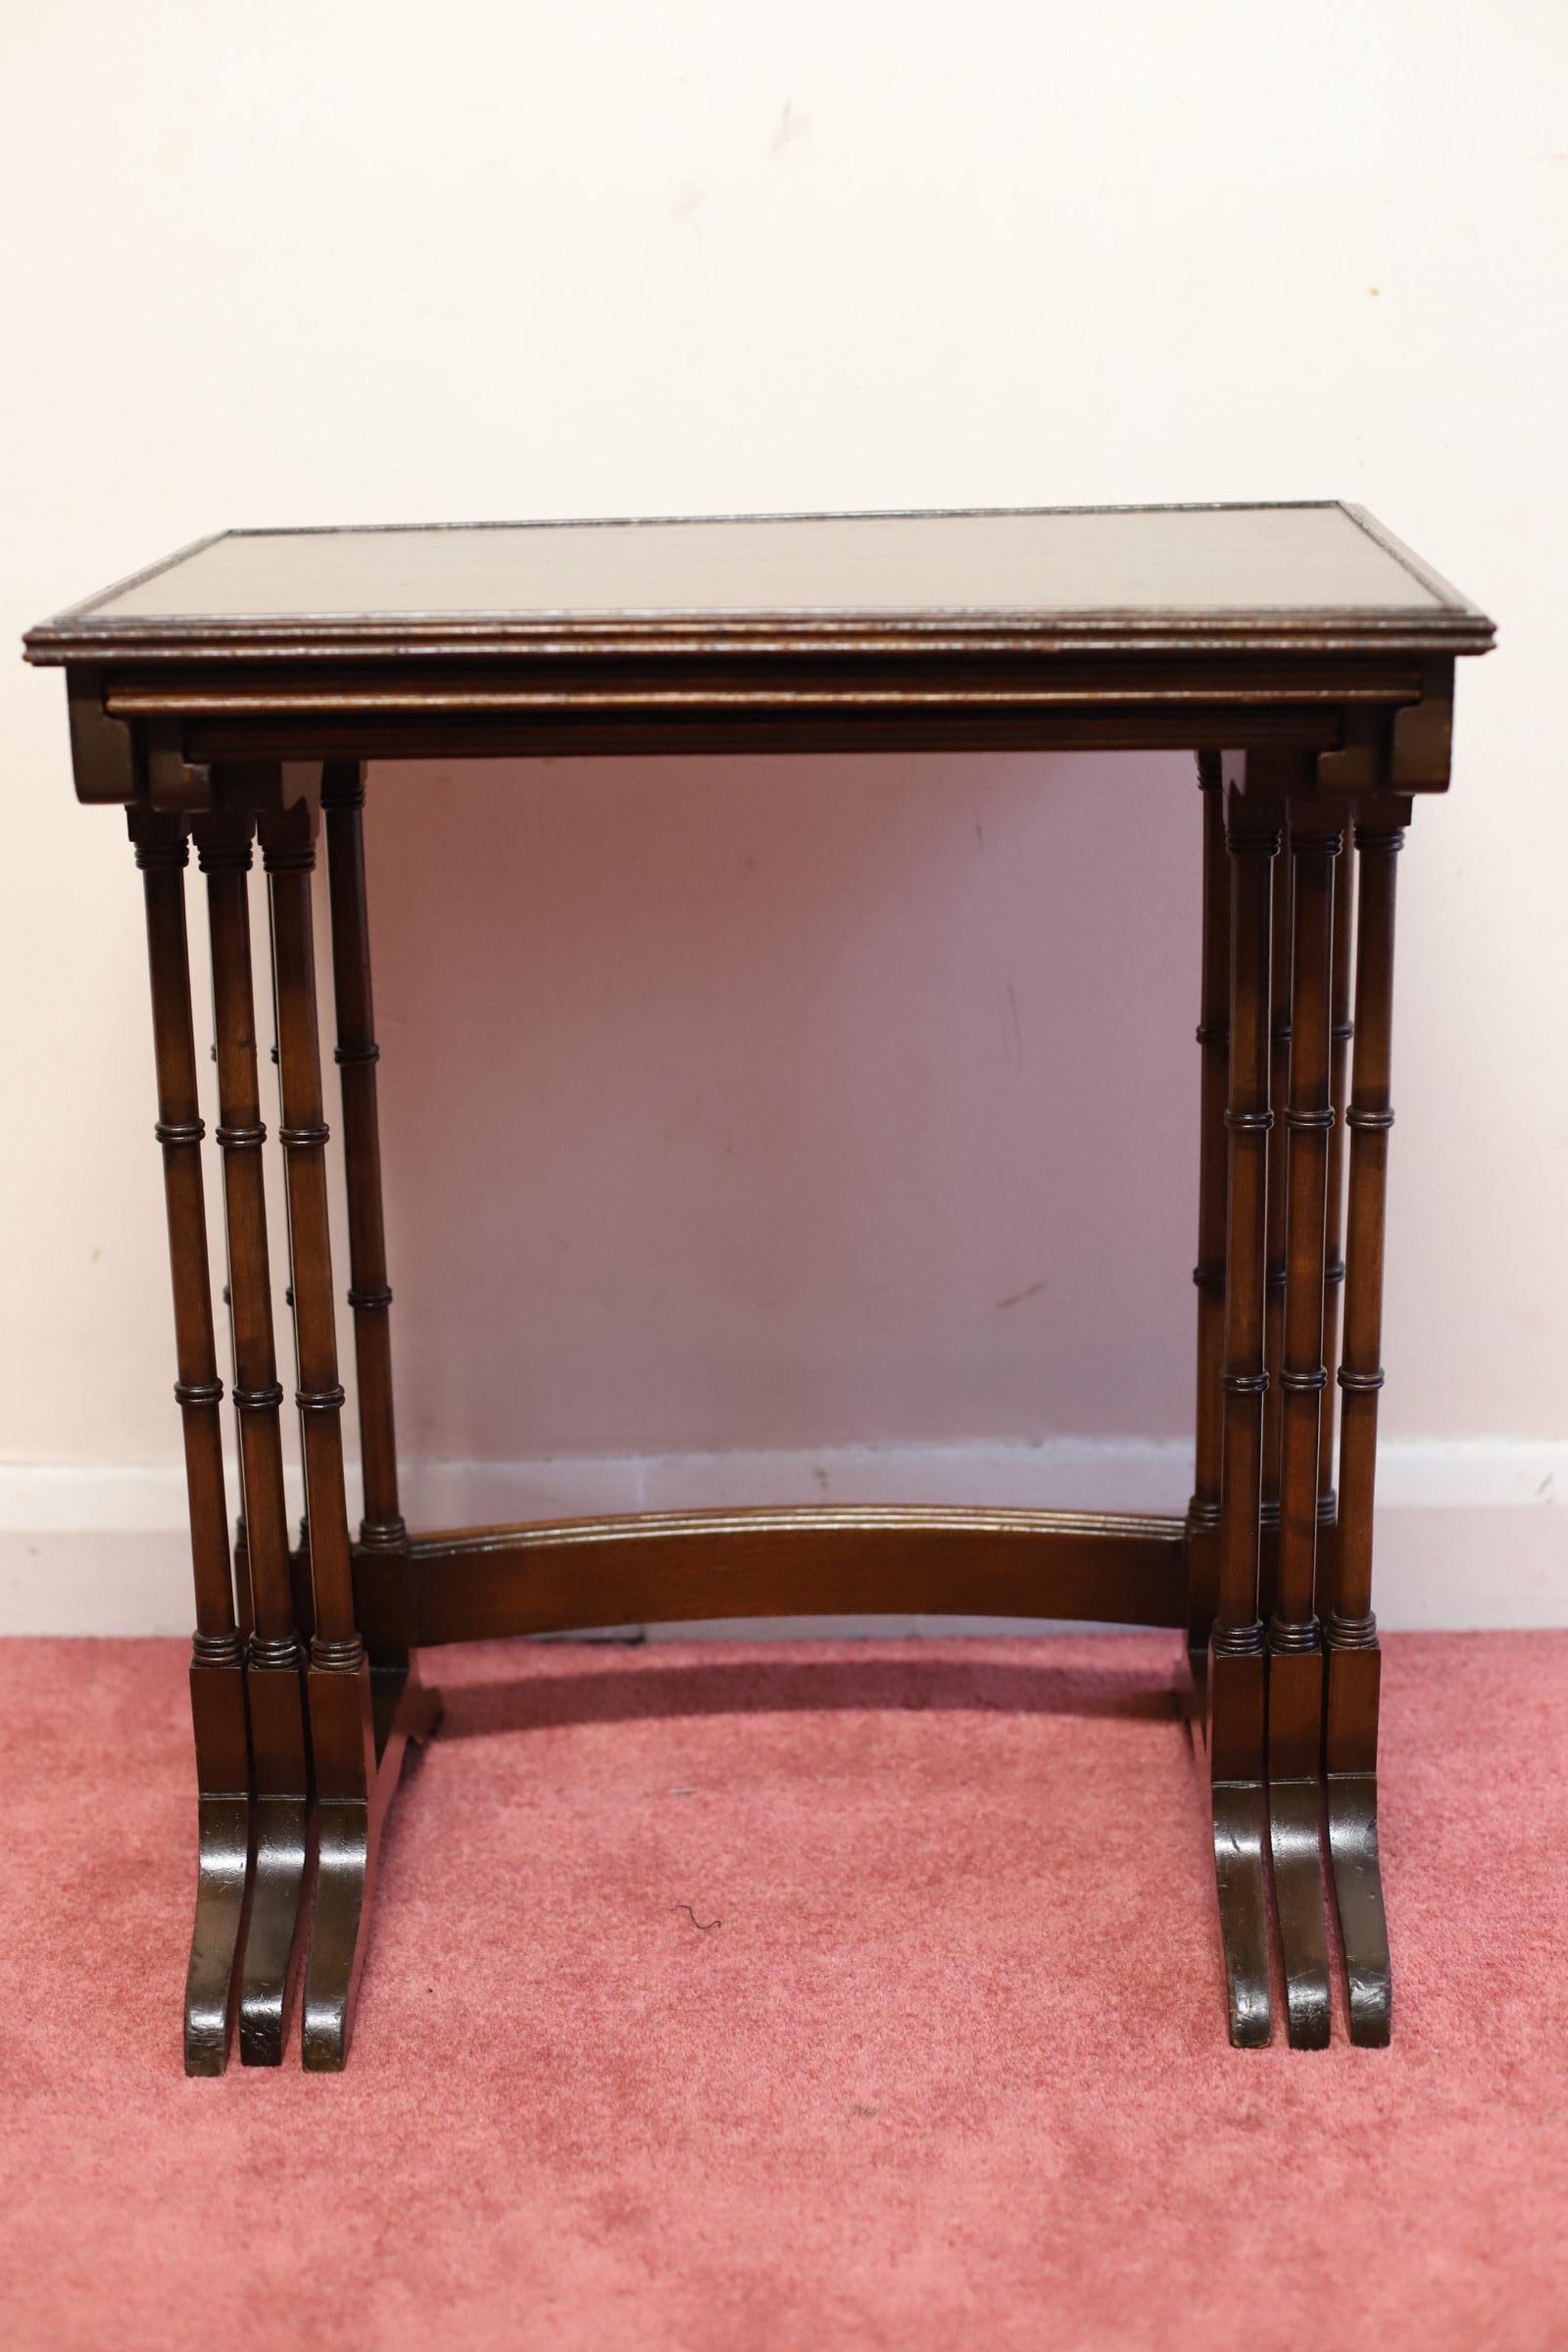 Hand-Crafted Beautiful Edwardian Nest of Three Tables For Sale